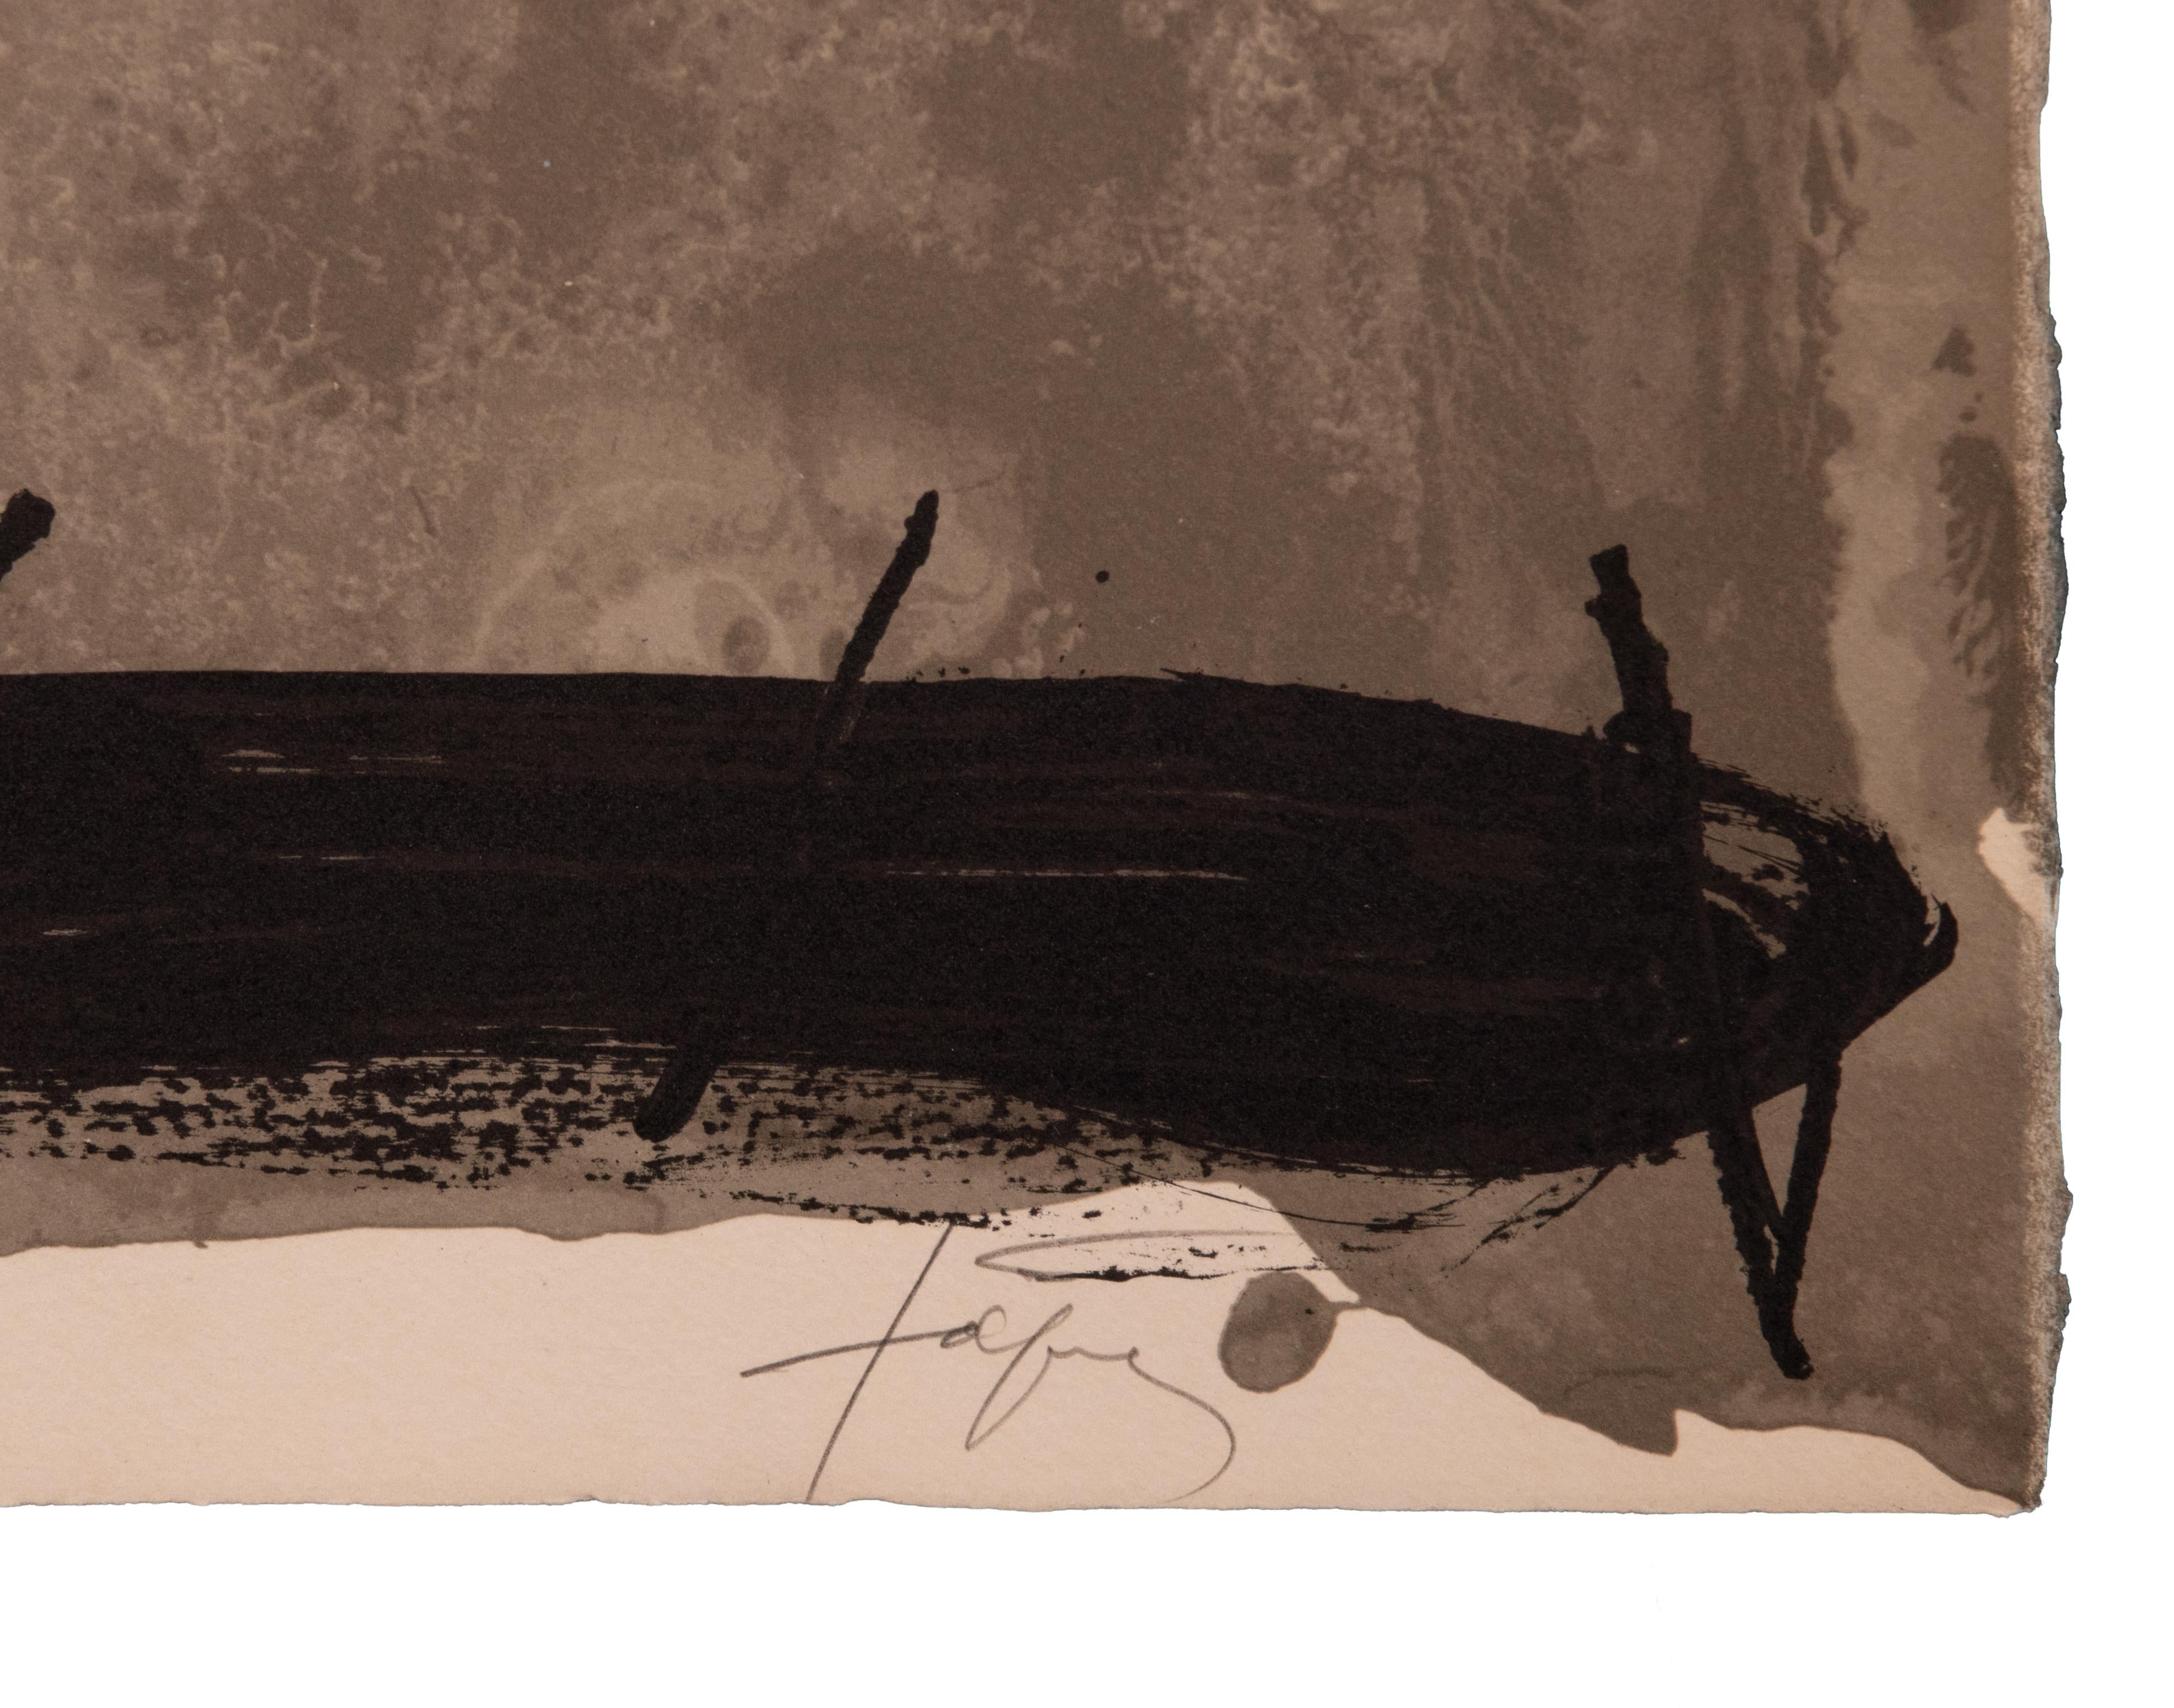 Untitled - Lithograph by Antoni Tapies - 1974 - Print by Antoni Tàpies